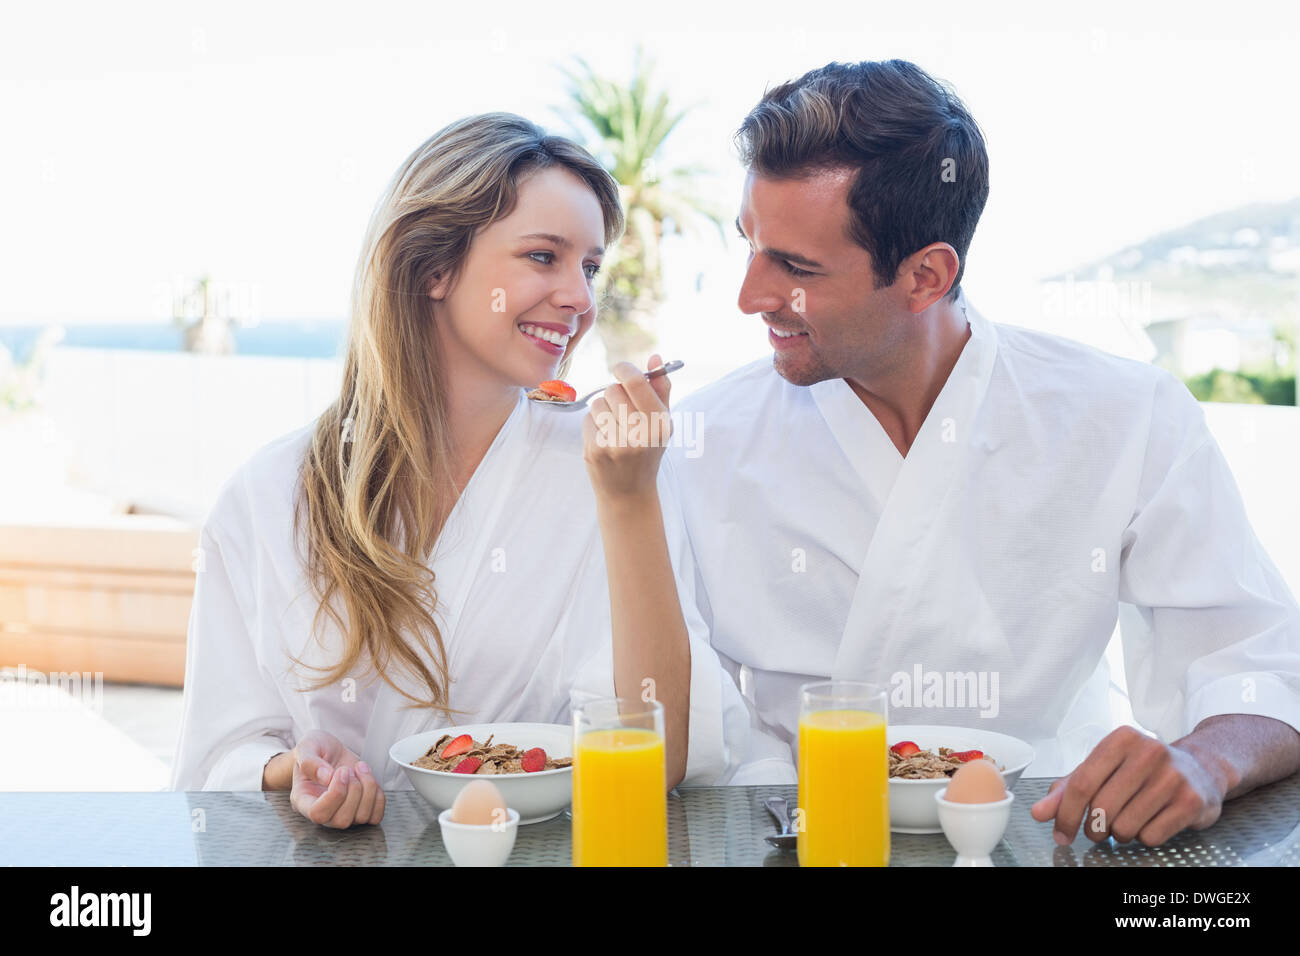 Smiling couple having breakfast Banque D'Images